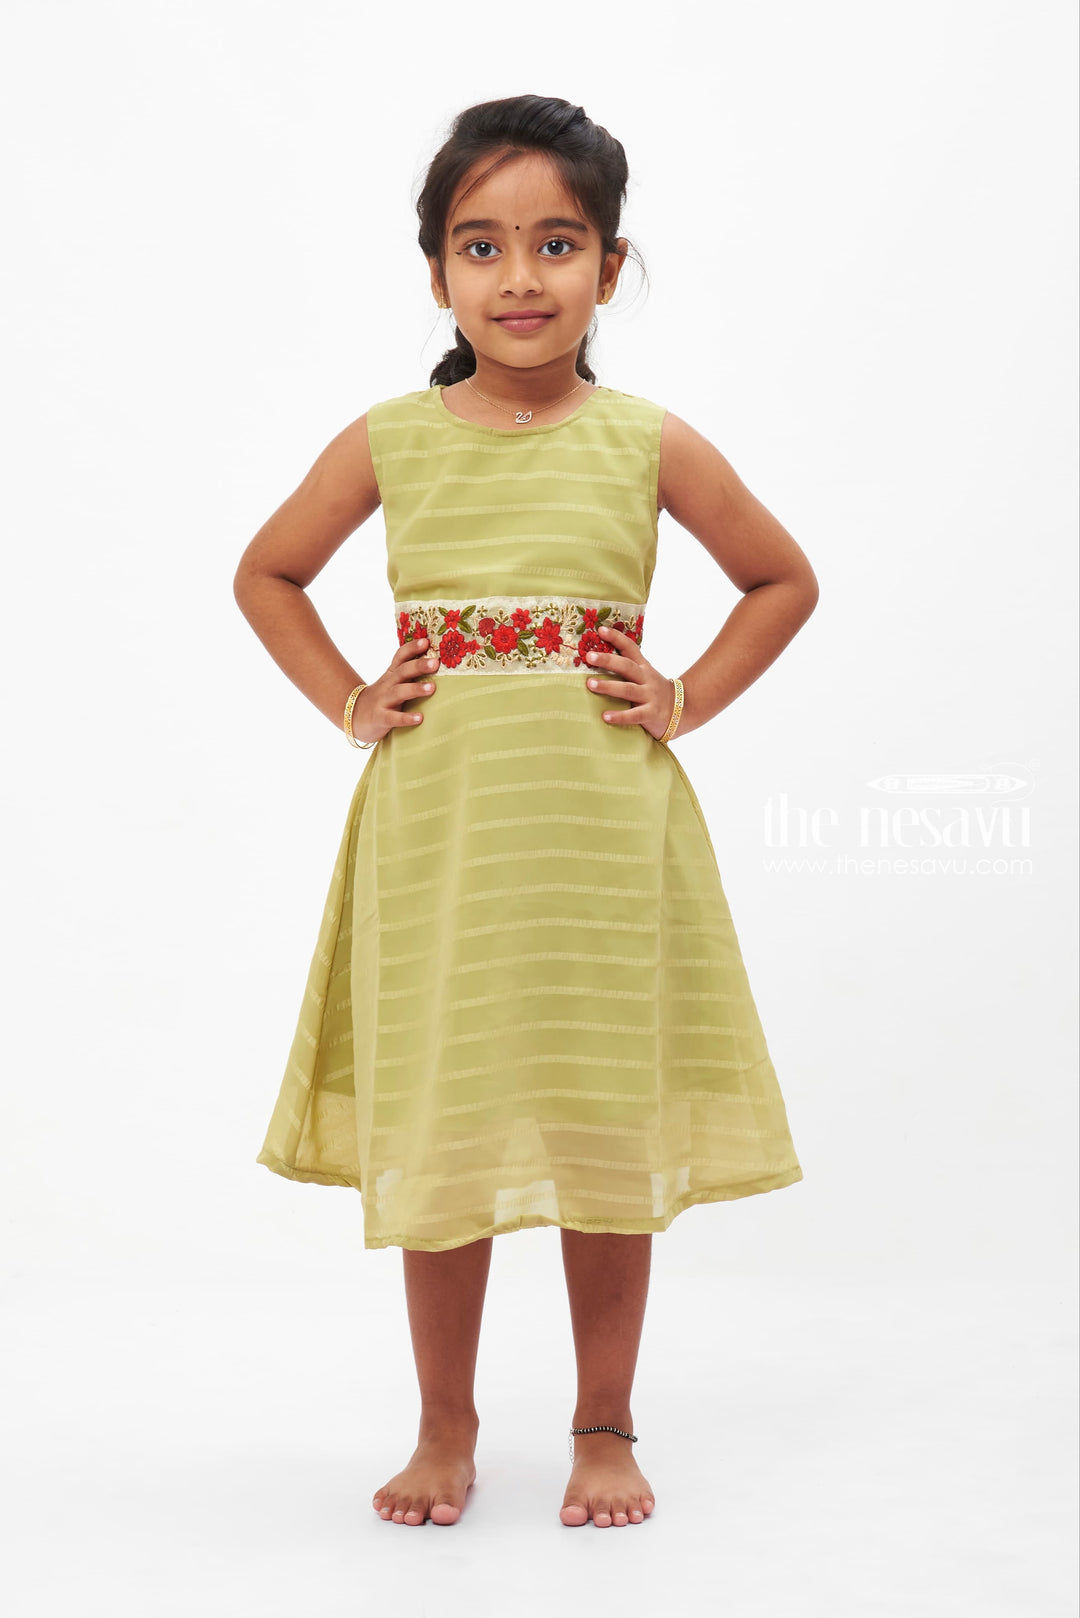 The Nesavu Girls Fancy Frock Green Striped with Embroidered Frock: Sleeveless Summer Charm for Girls Nesavu 18 (2Y) / Green GFC1212B-18 Sleeveless Striped Frock | Refreshing Daywear for Kids | The Nesavu